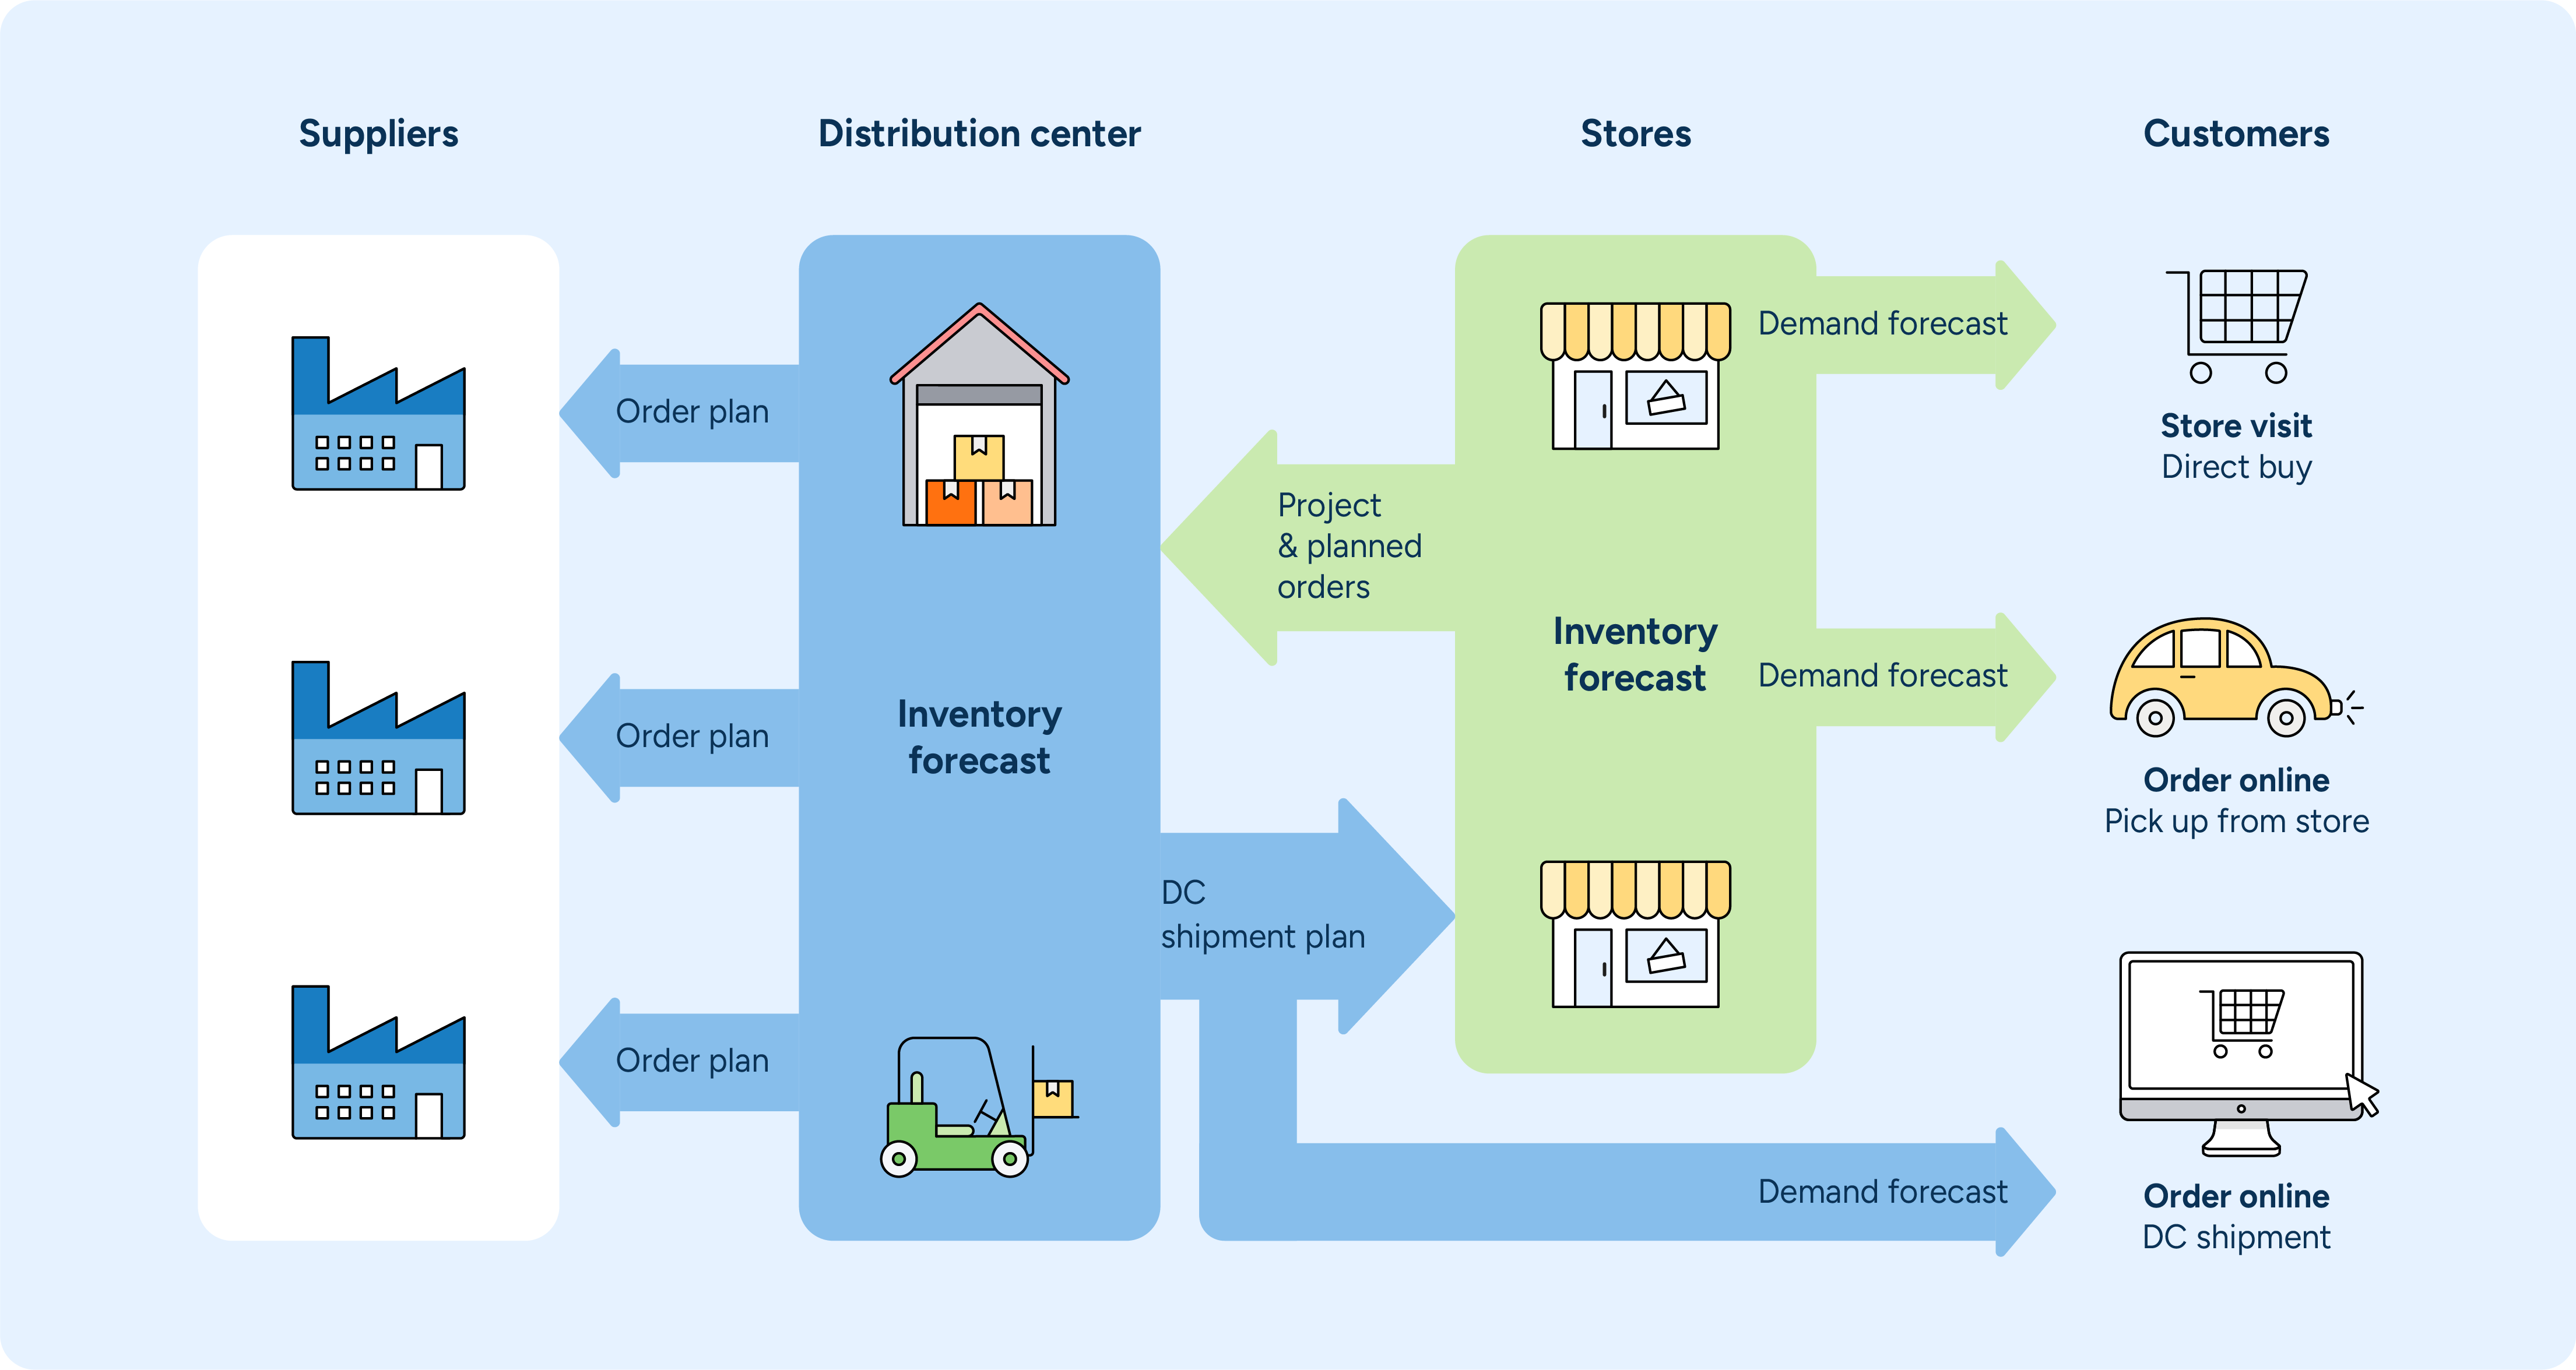 An illustration showing the process of an integrated retail supply chain.